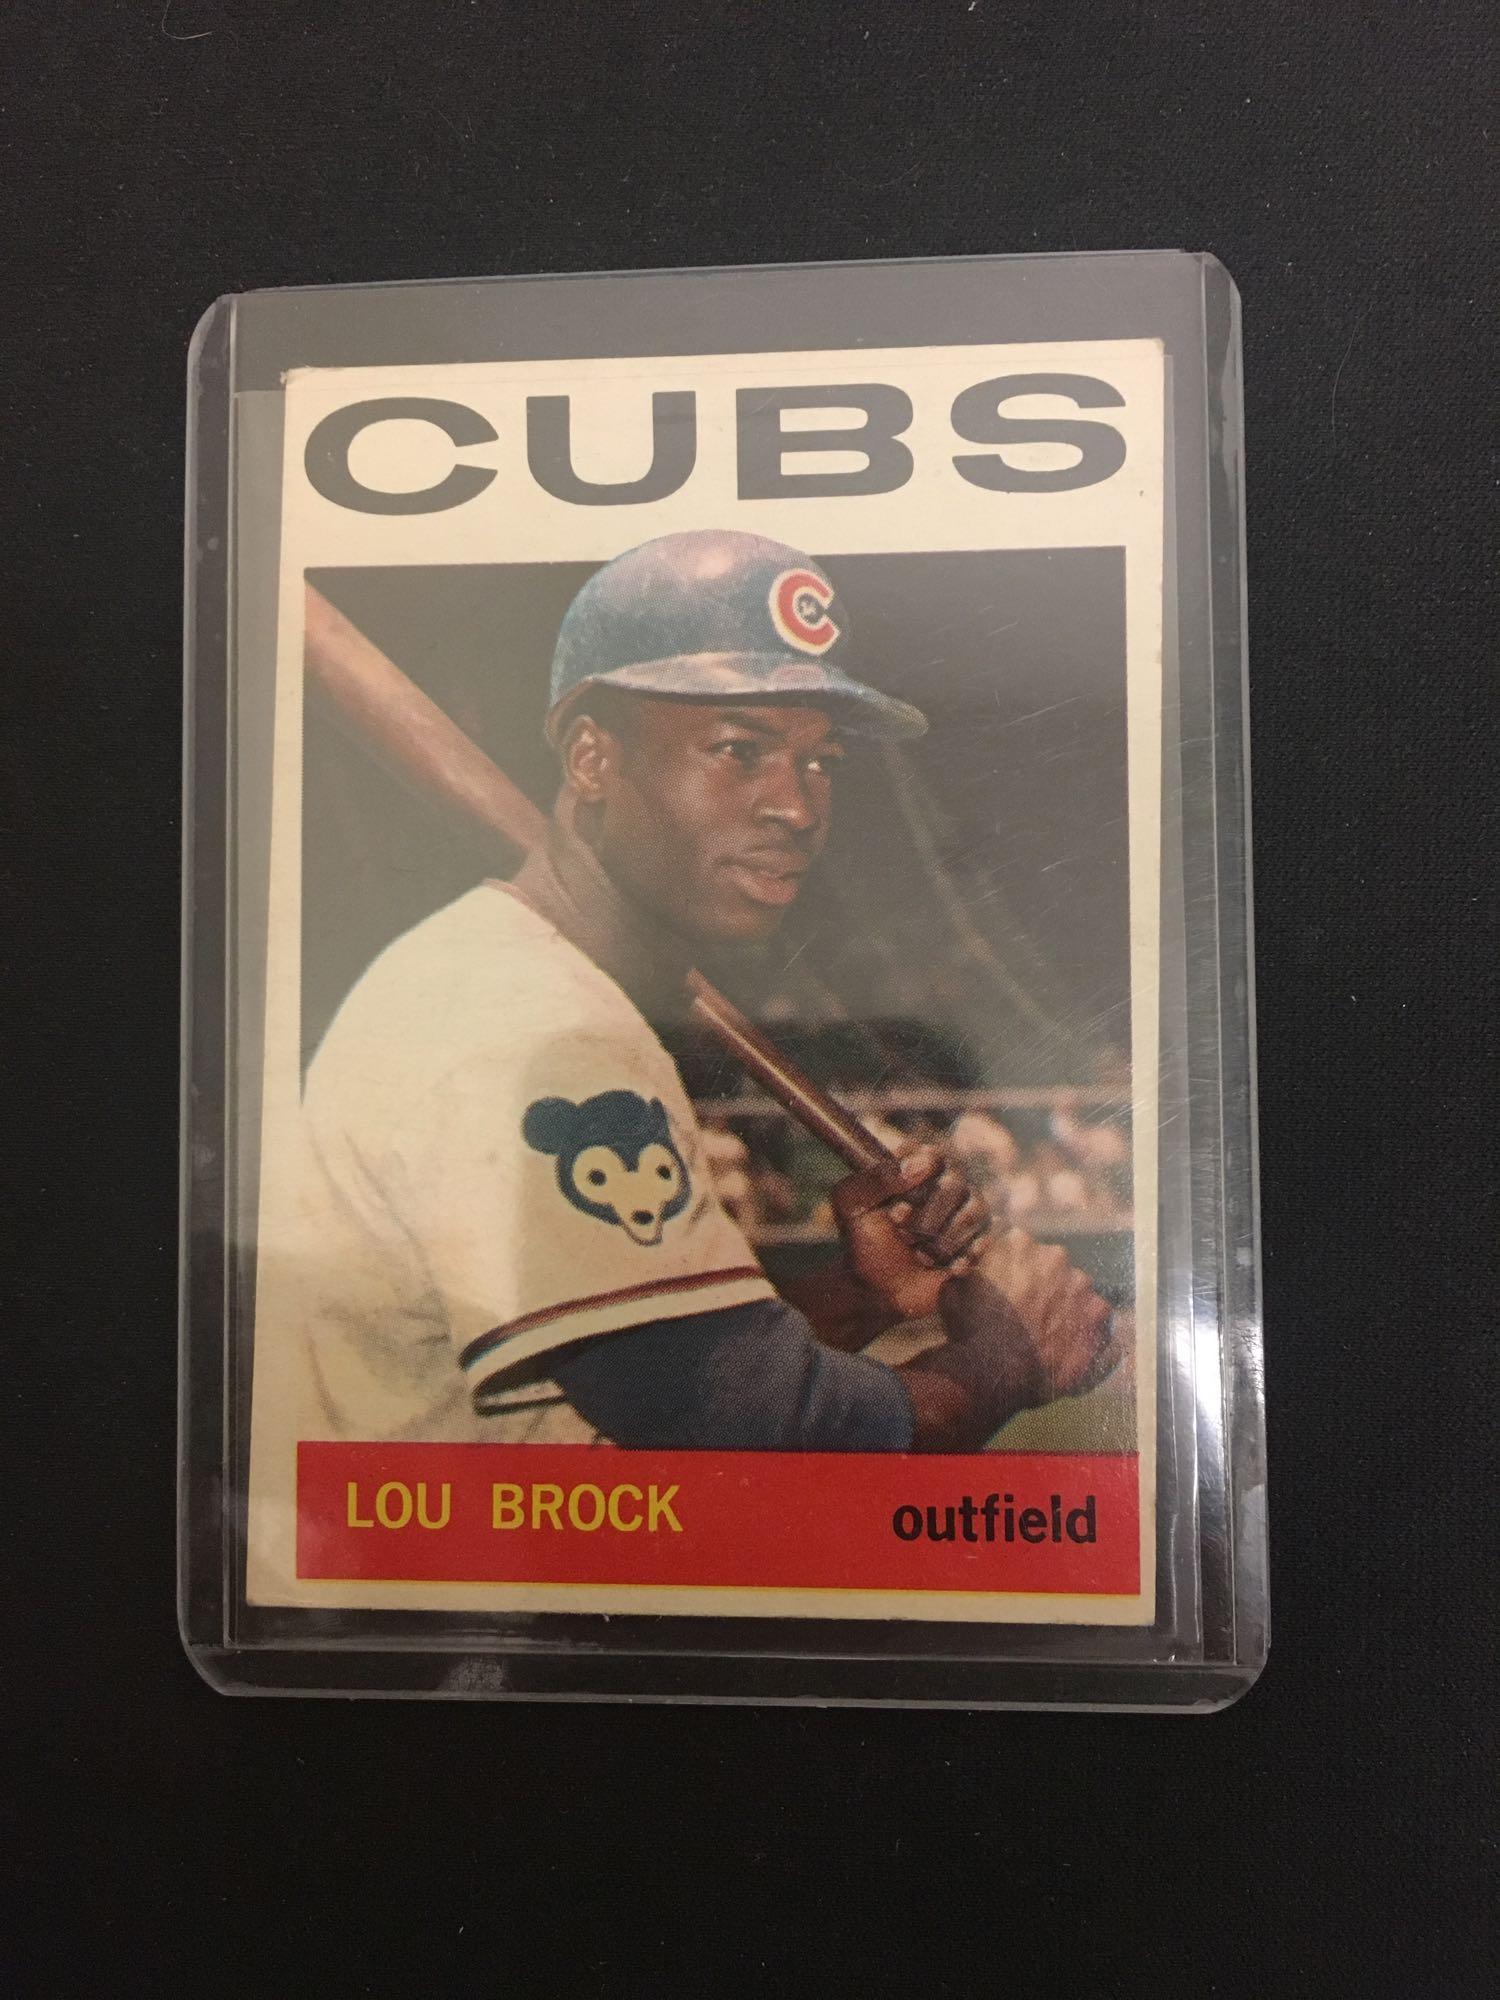 It was 50 years ago Sunday that Cards got Brock from Cubs